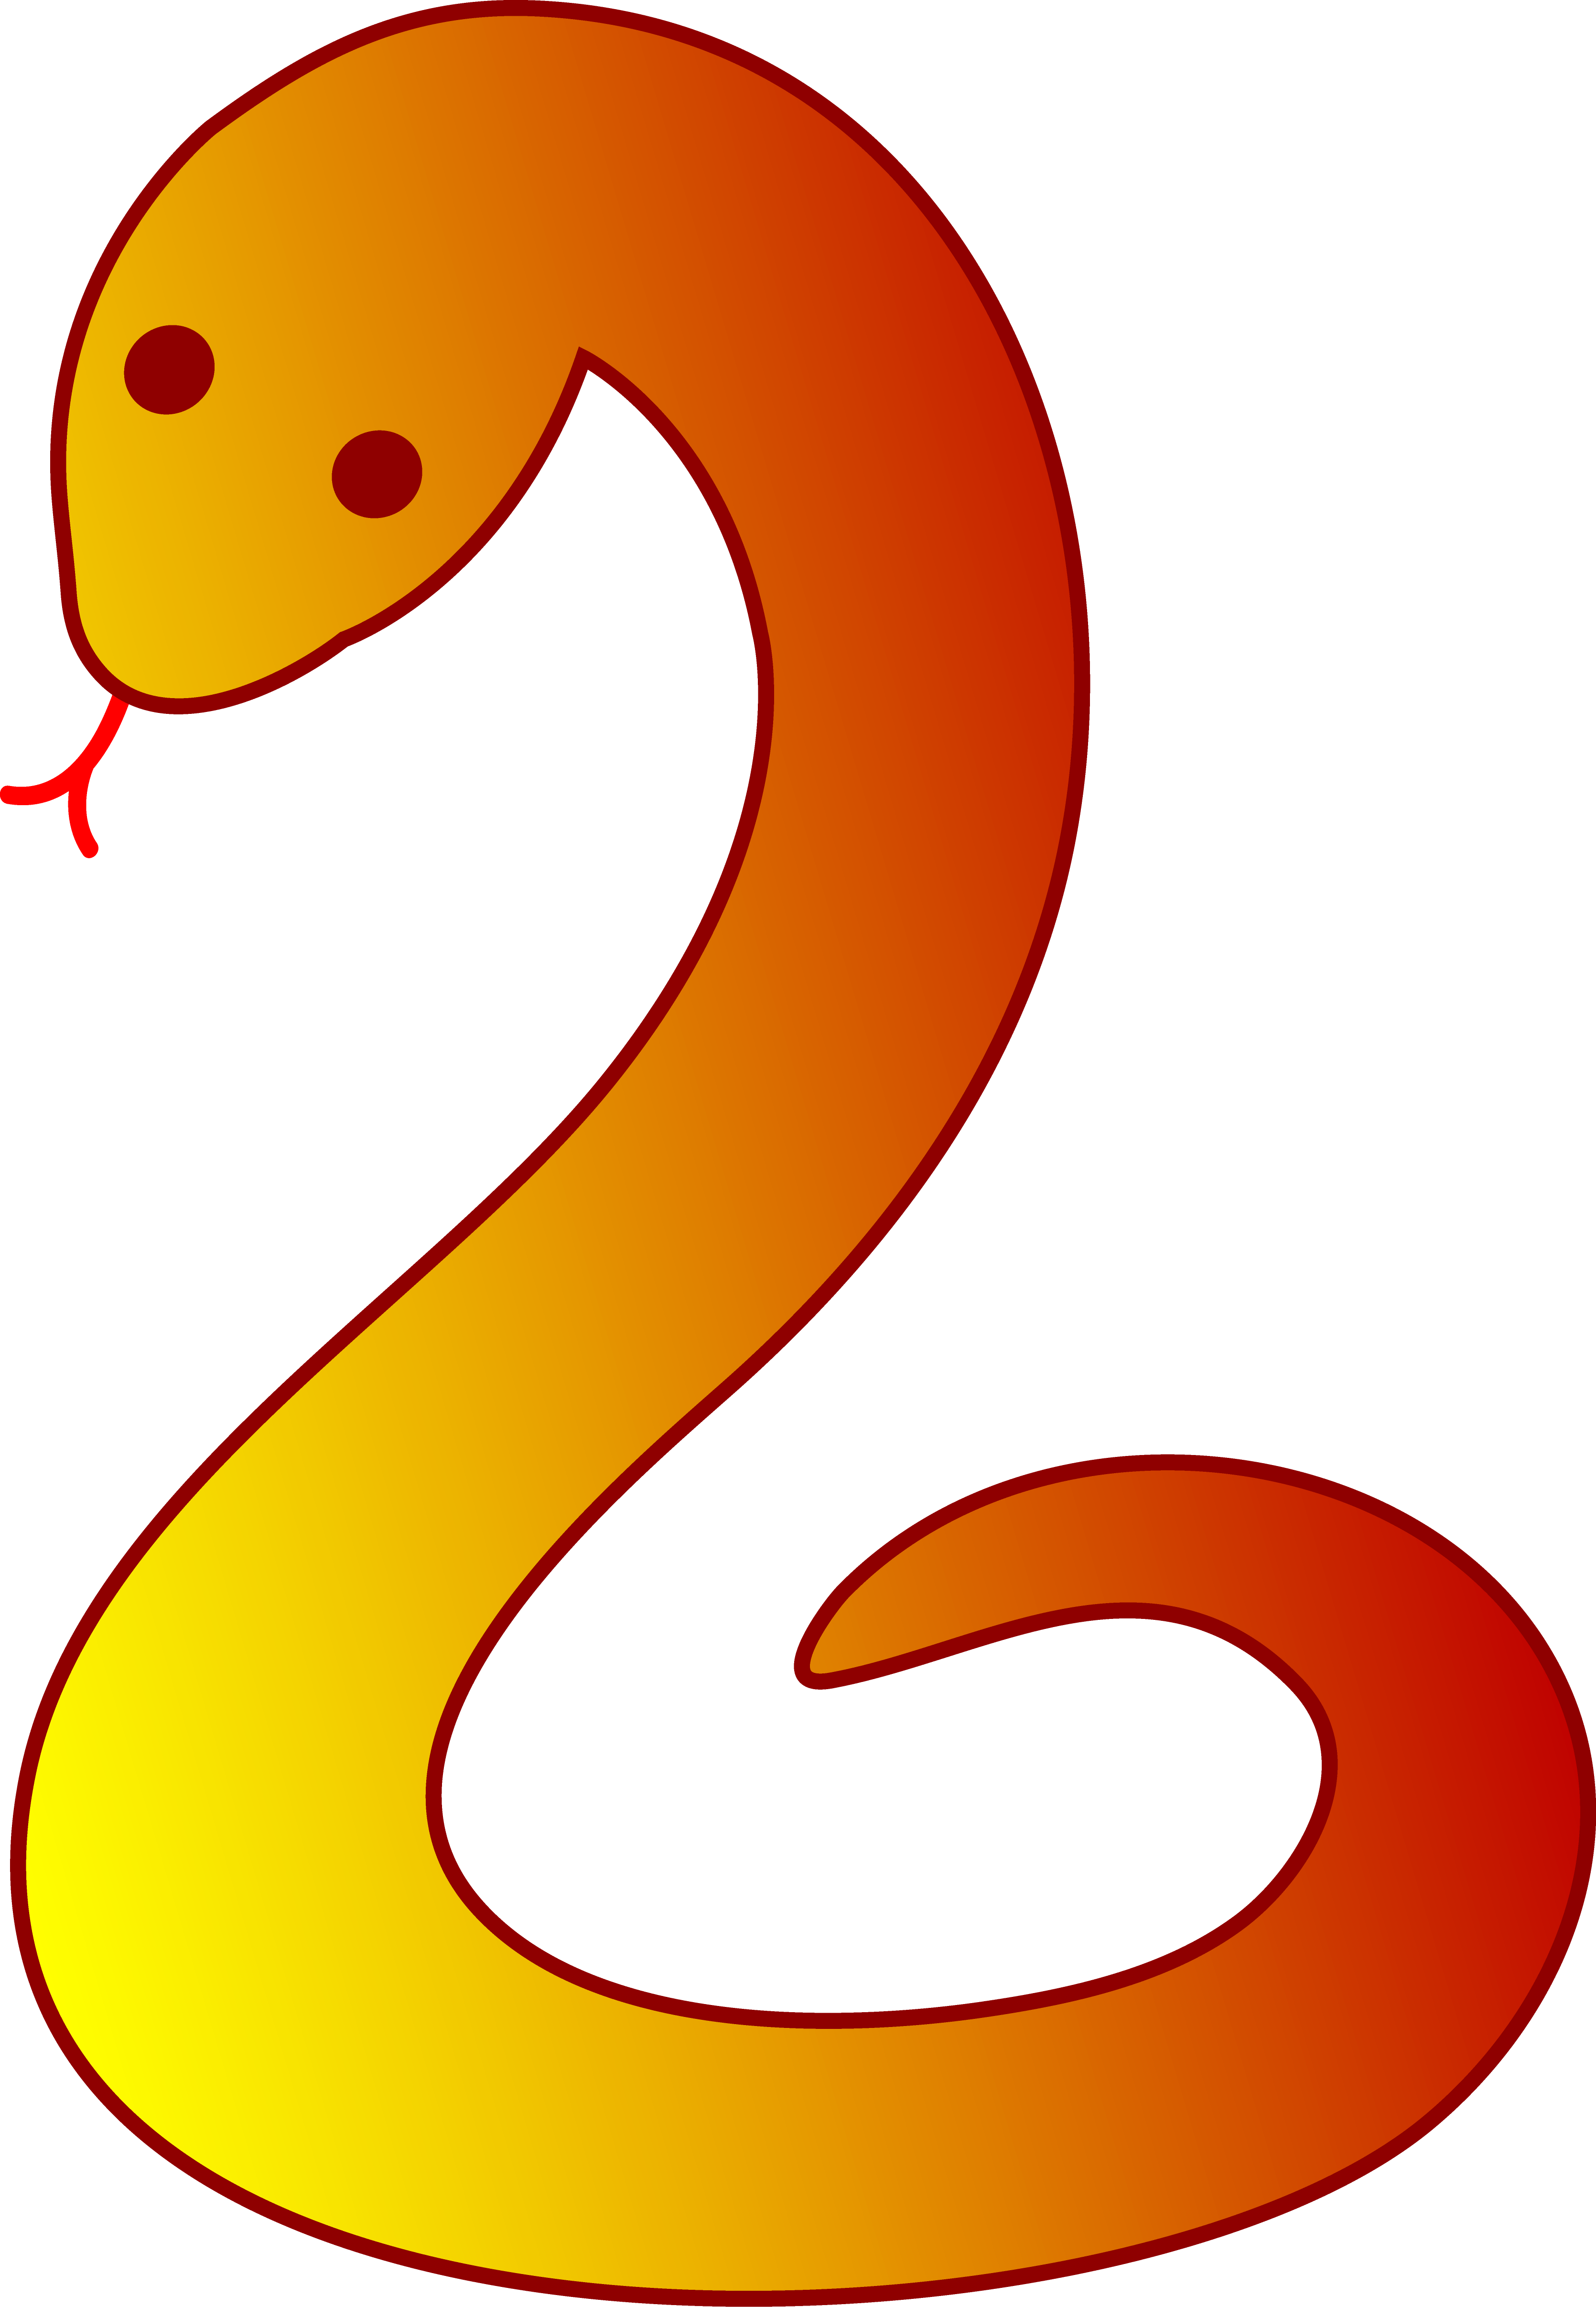 Worm clipart roundworm. Serpent panda free images